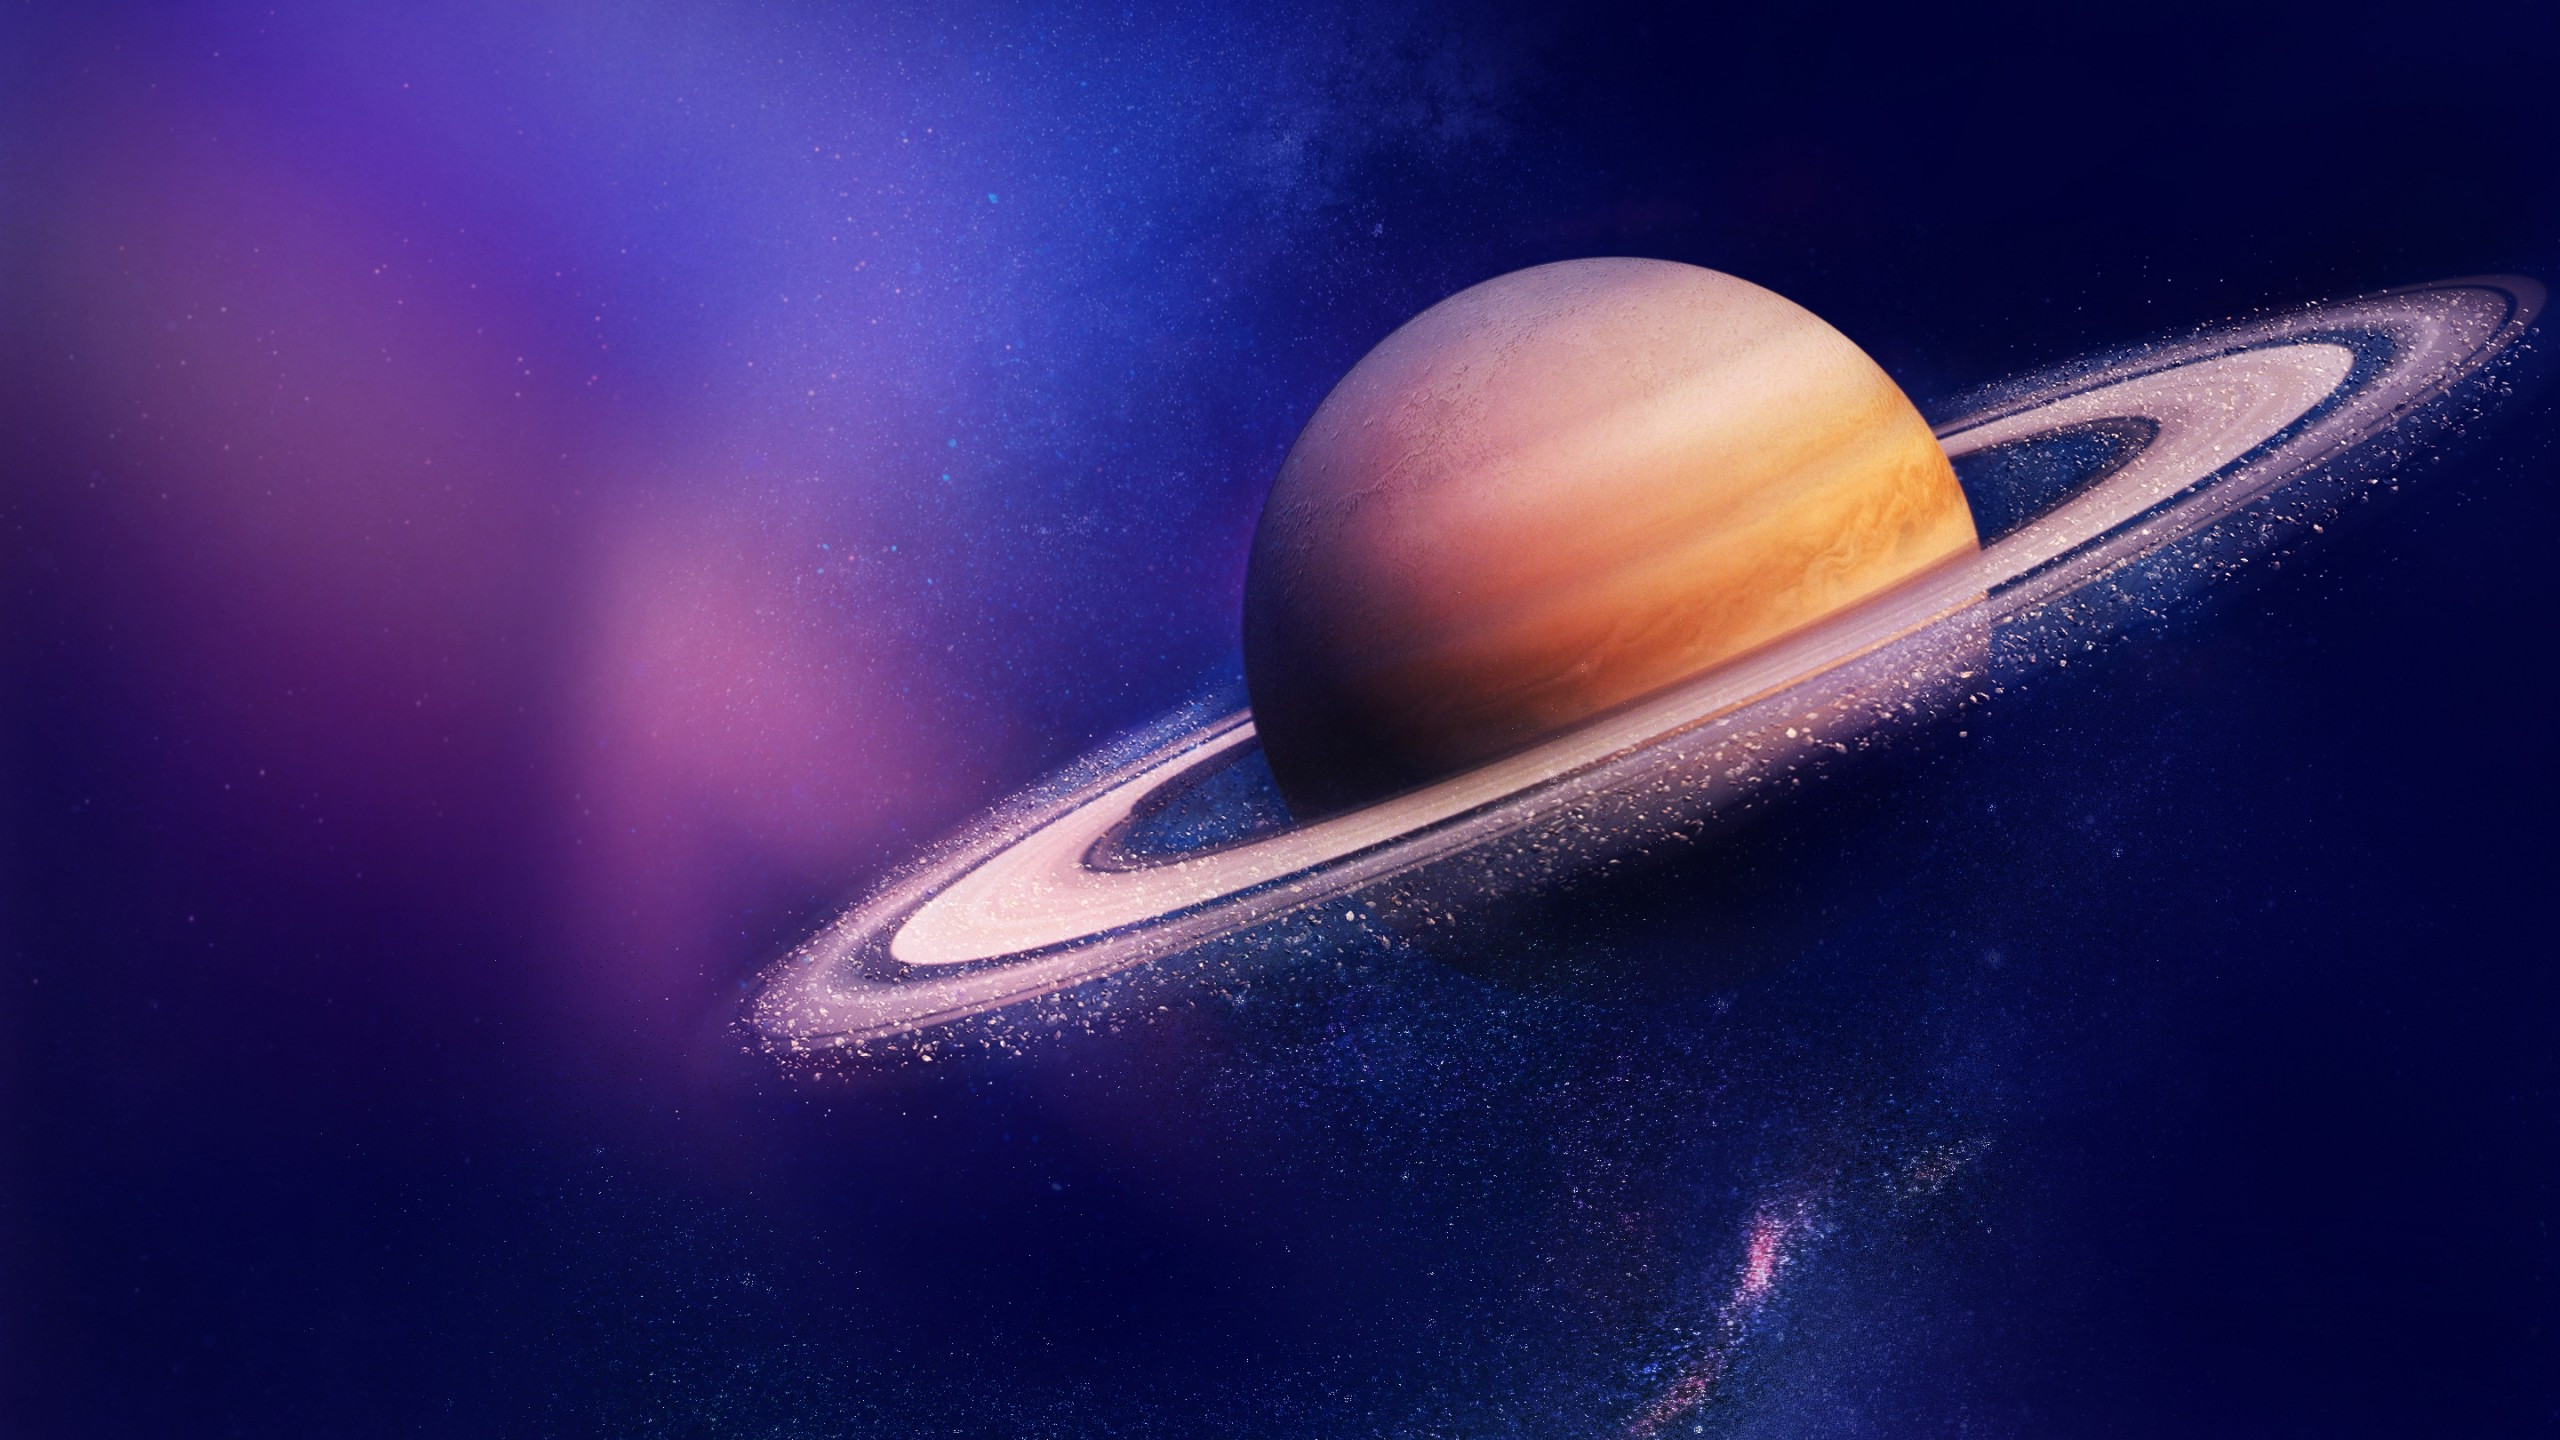 Download 2560x1440 Saturn Ring, Nebula, Dust Wallpaper for iMac 27 inch